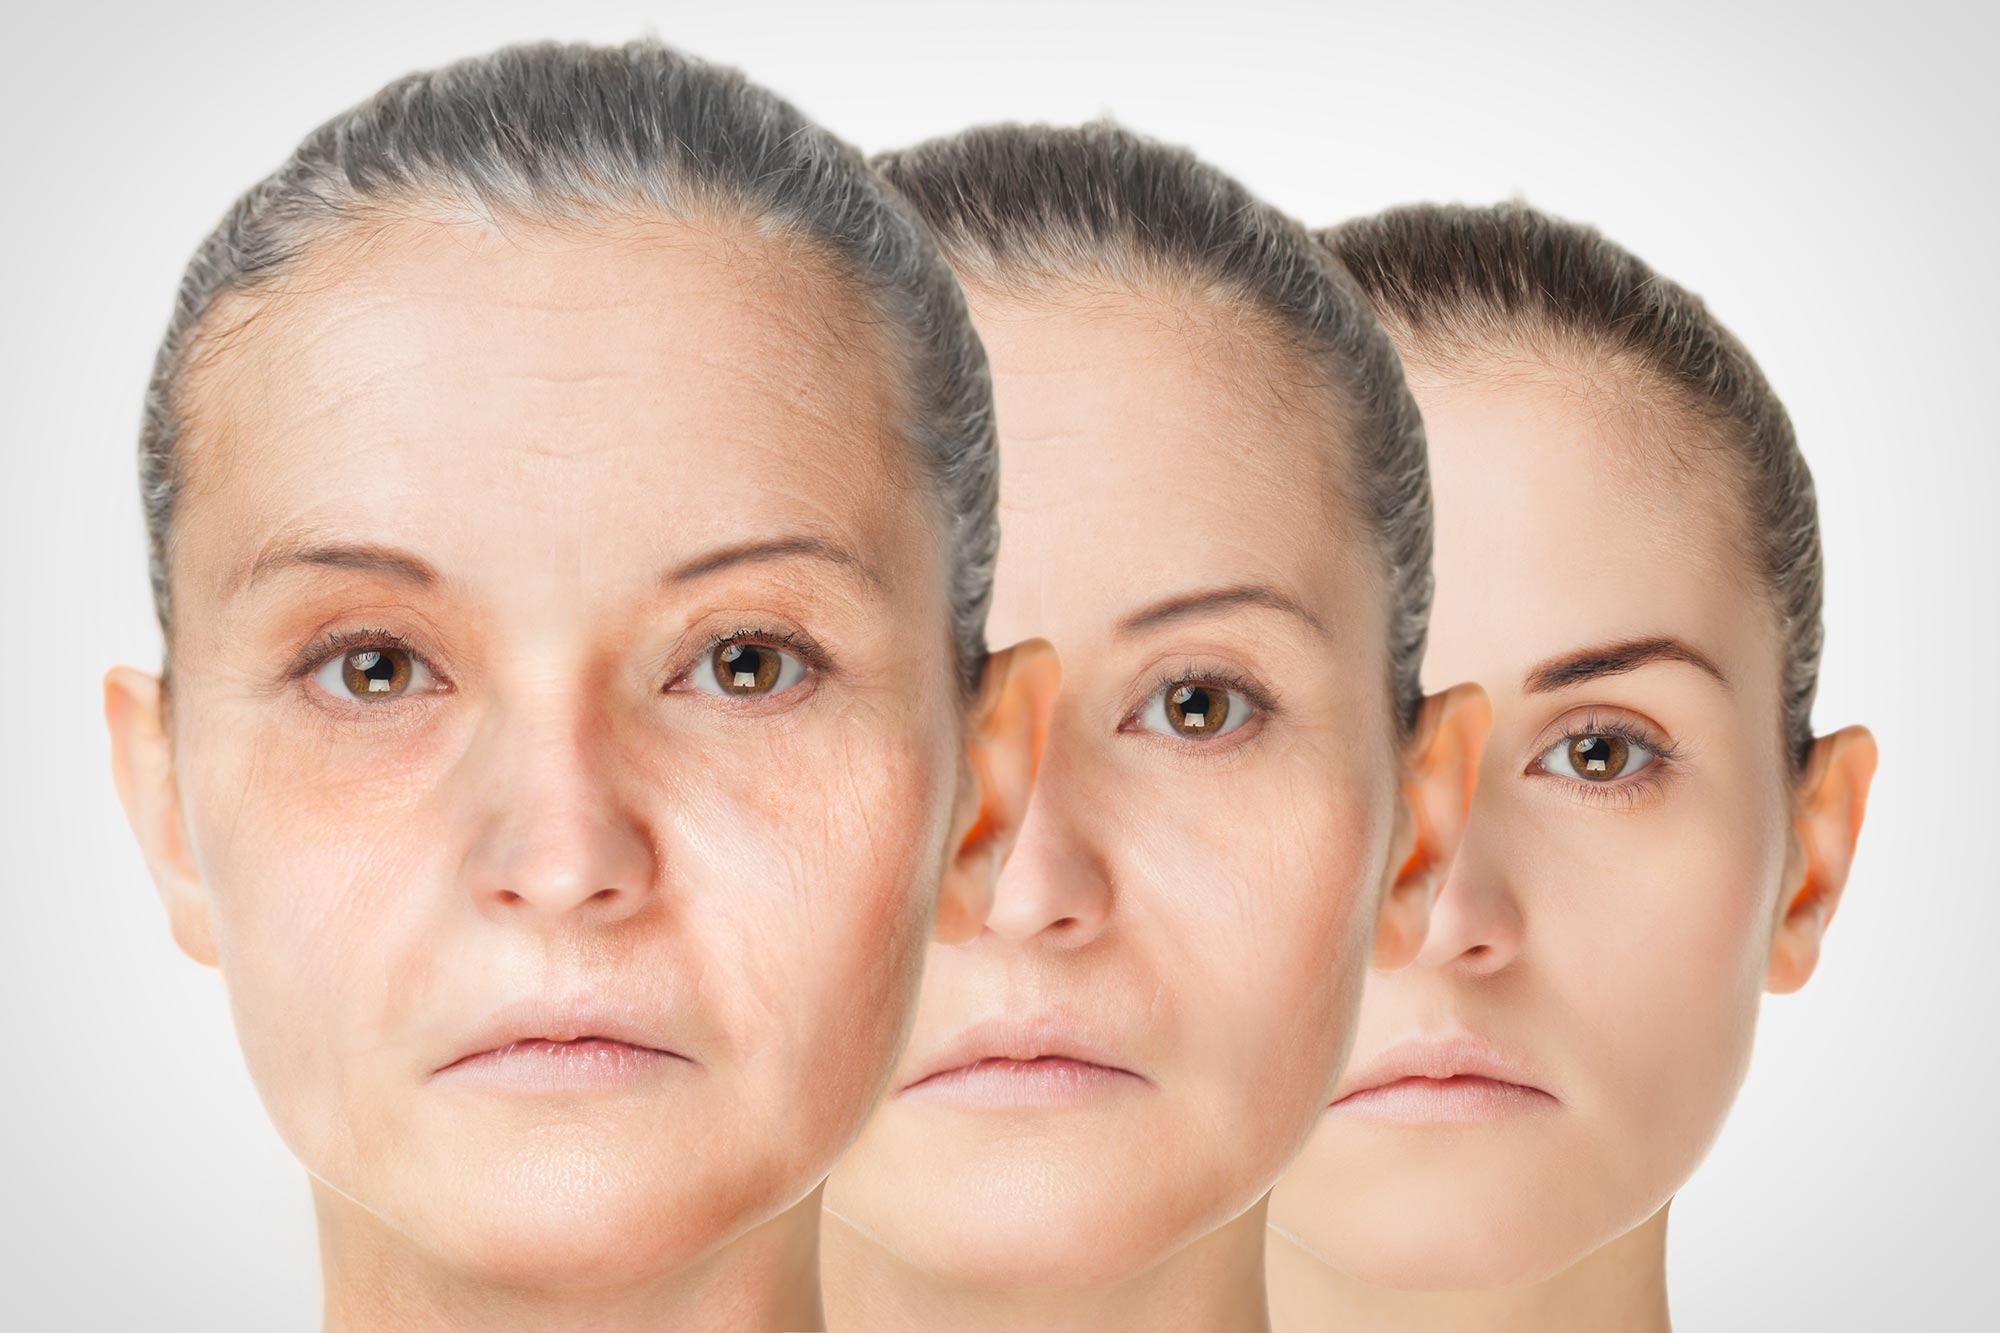 Anti-Aging Market Size, Trends, Demographics, Global Opportunities, Future Value and Statistics 2022-2027